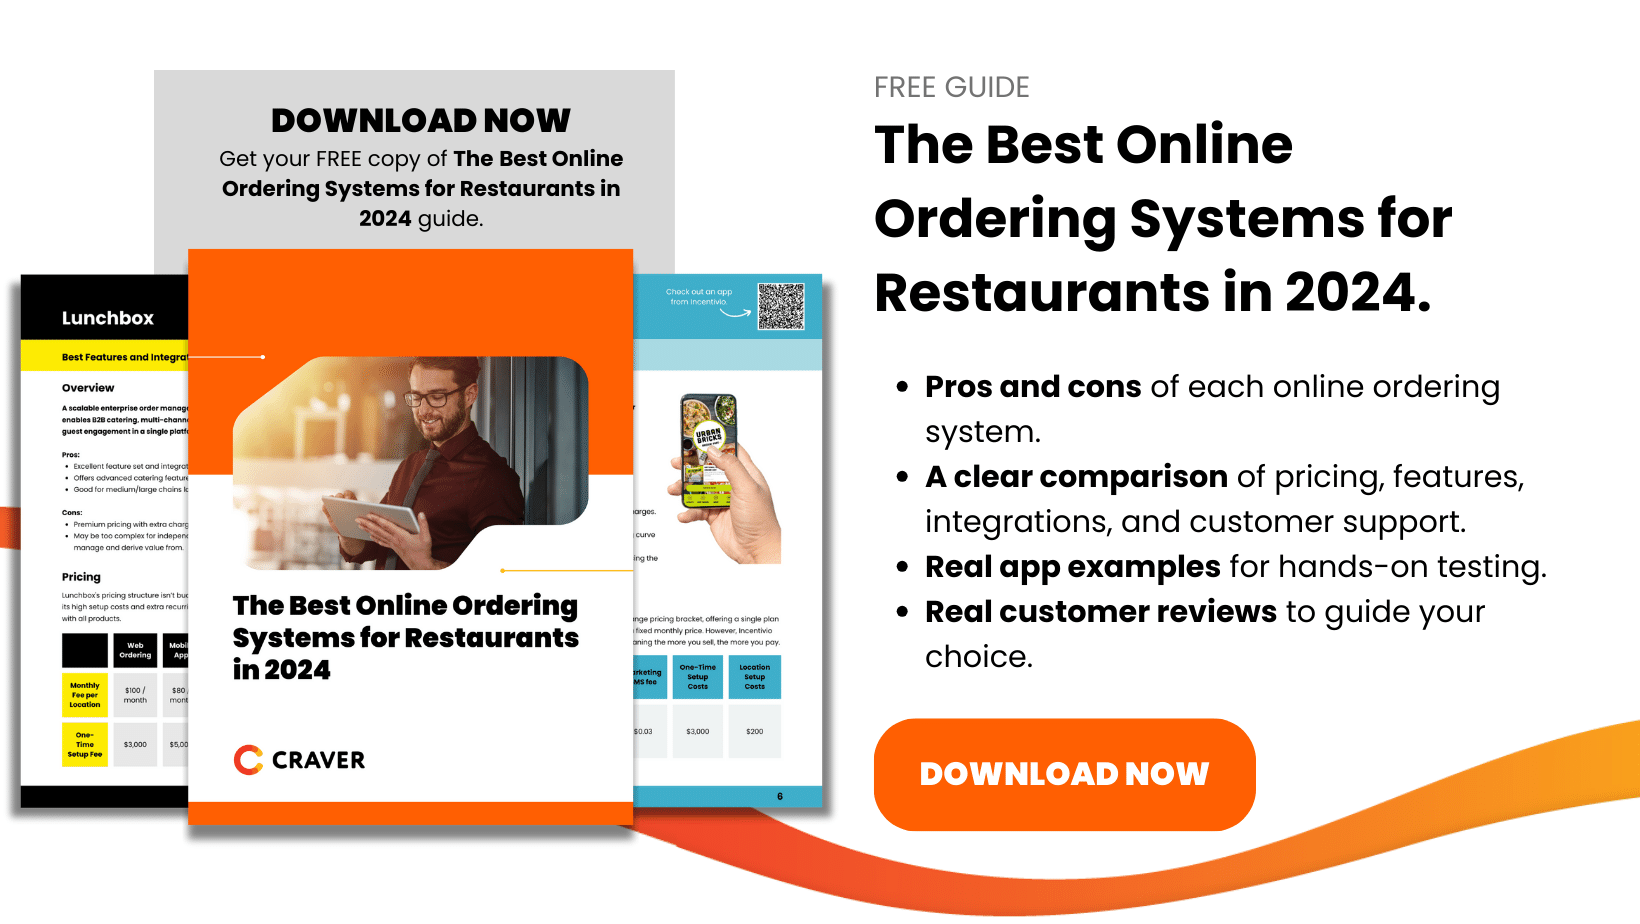 The Best Online Ordering Systems for Restaurants in 2024 guide download